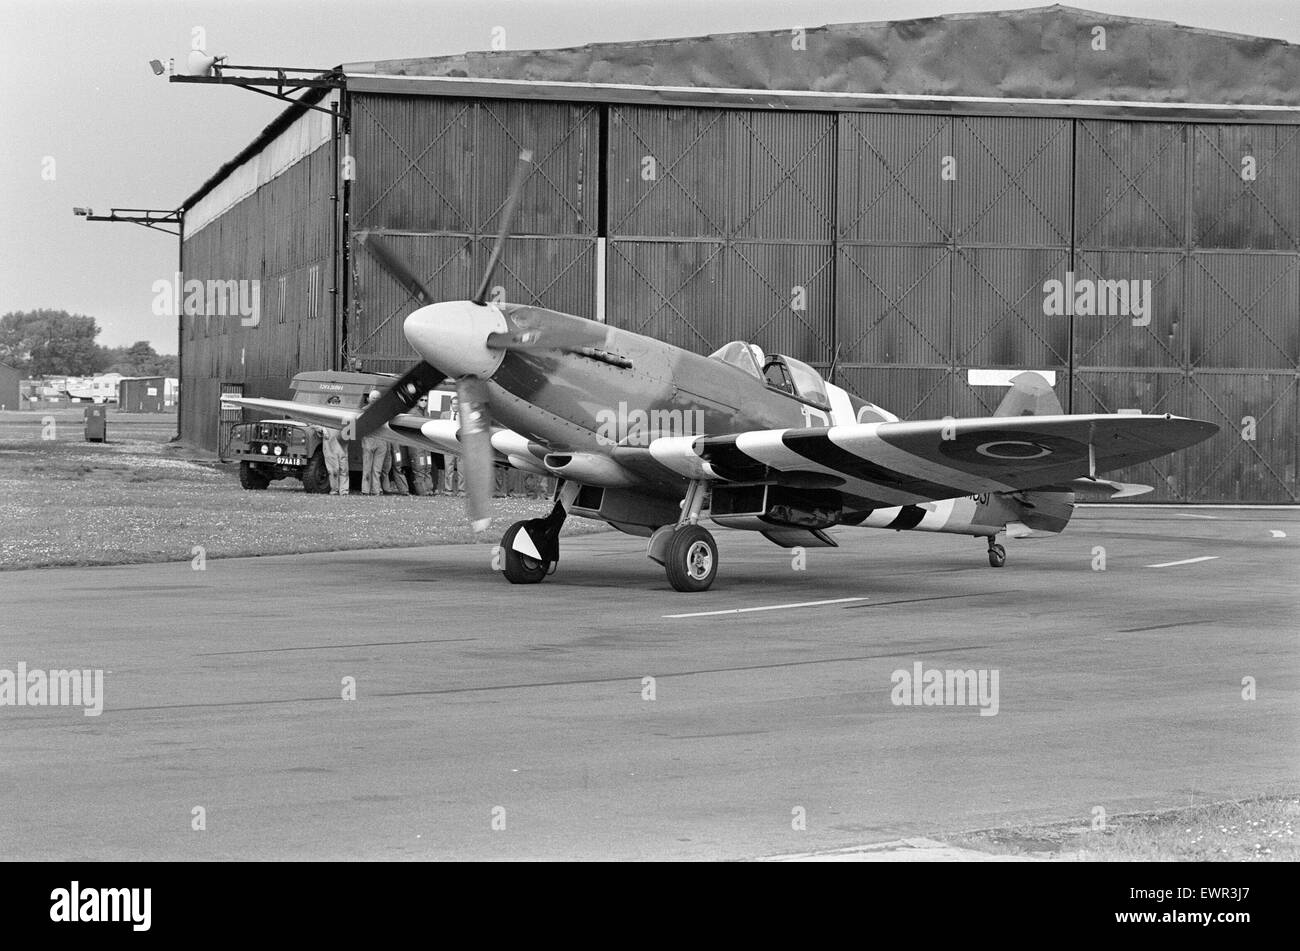 Spitfire single seat fighter aircraft on show at RAF Woodvale, South of Southport, Merseyside, 10th June 1987. Spitfire Mk.PRXIX PM631. Type: VS390. Serial PM631. 91 DL E. Stock Photo